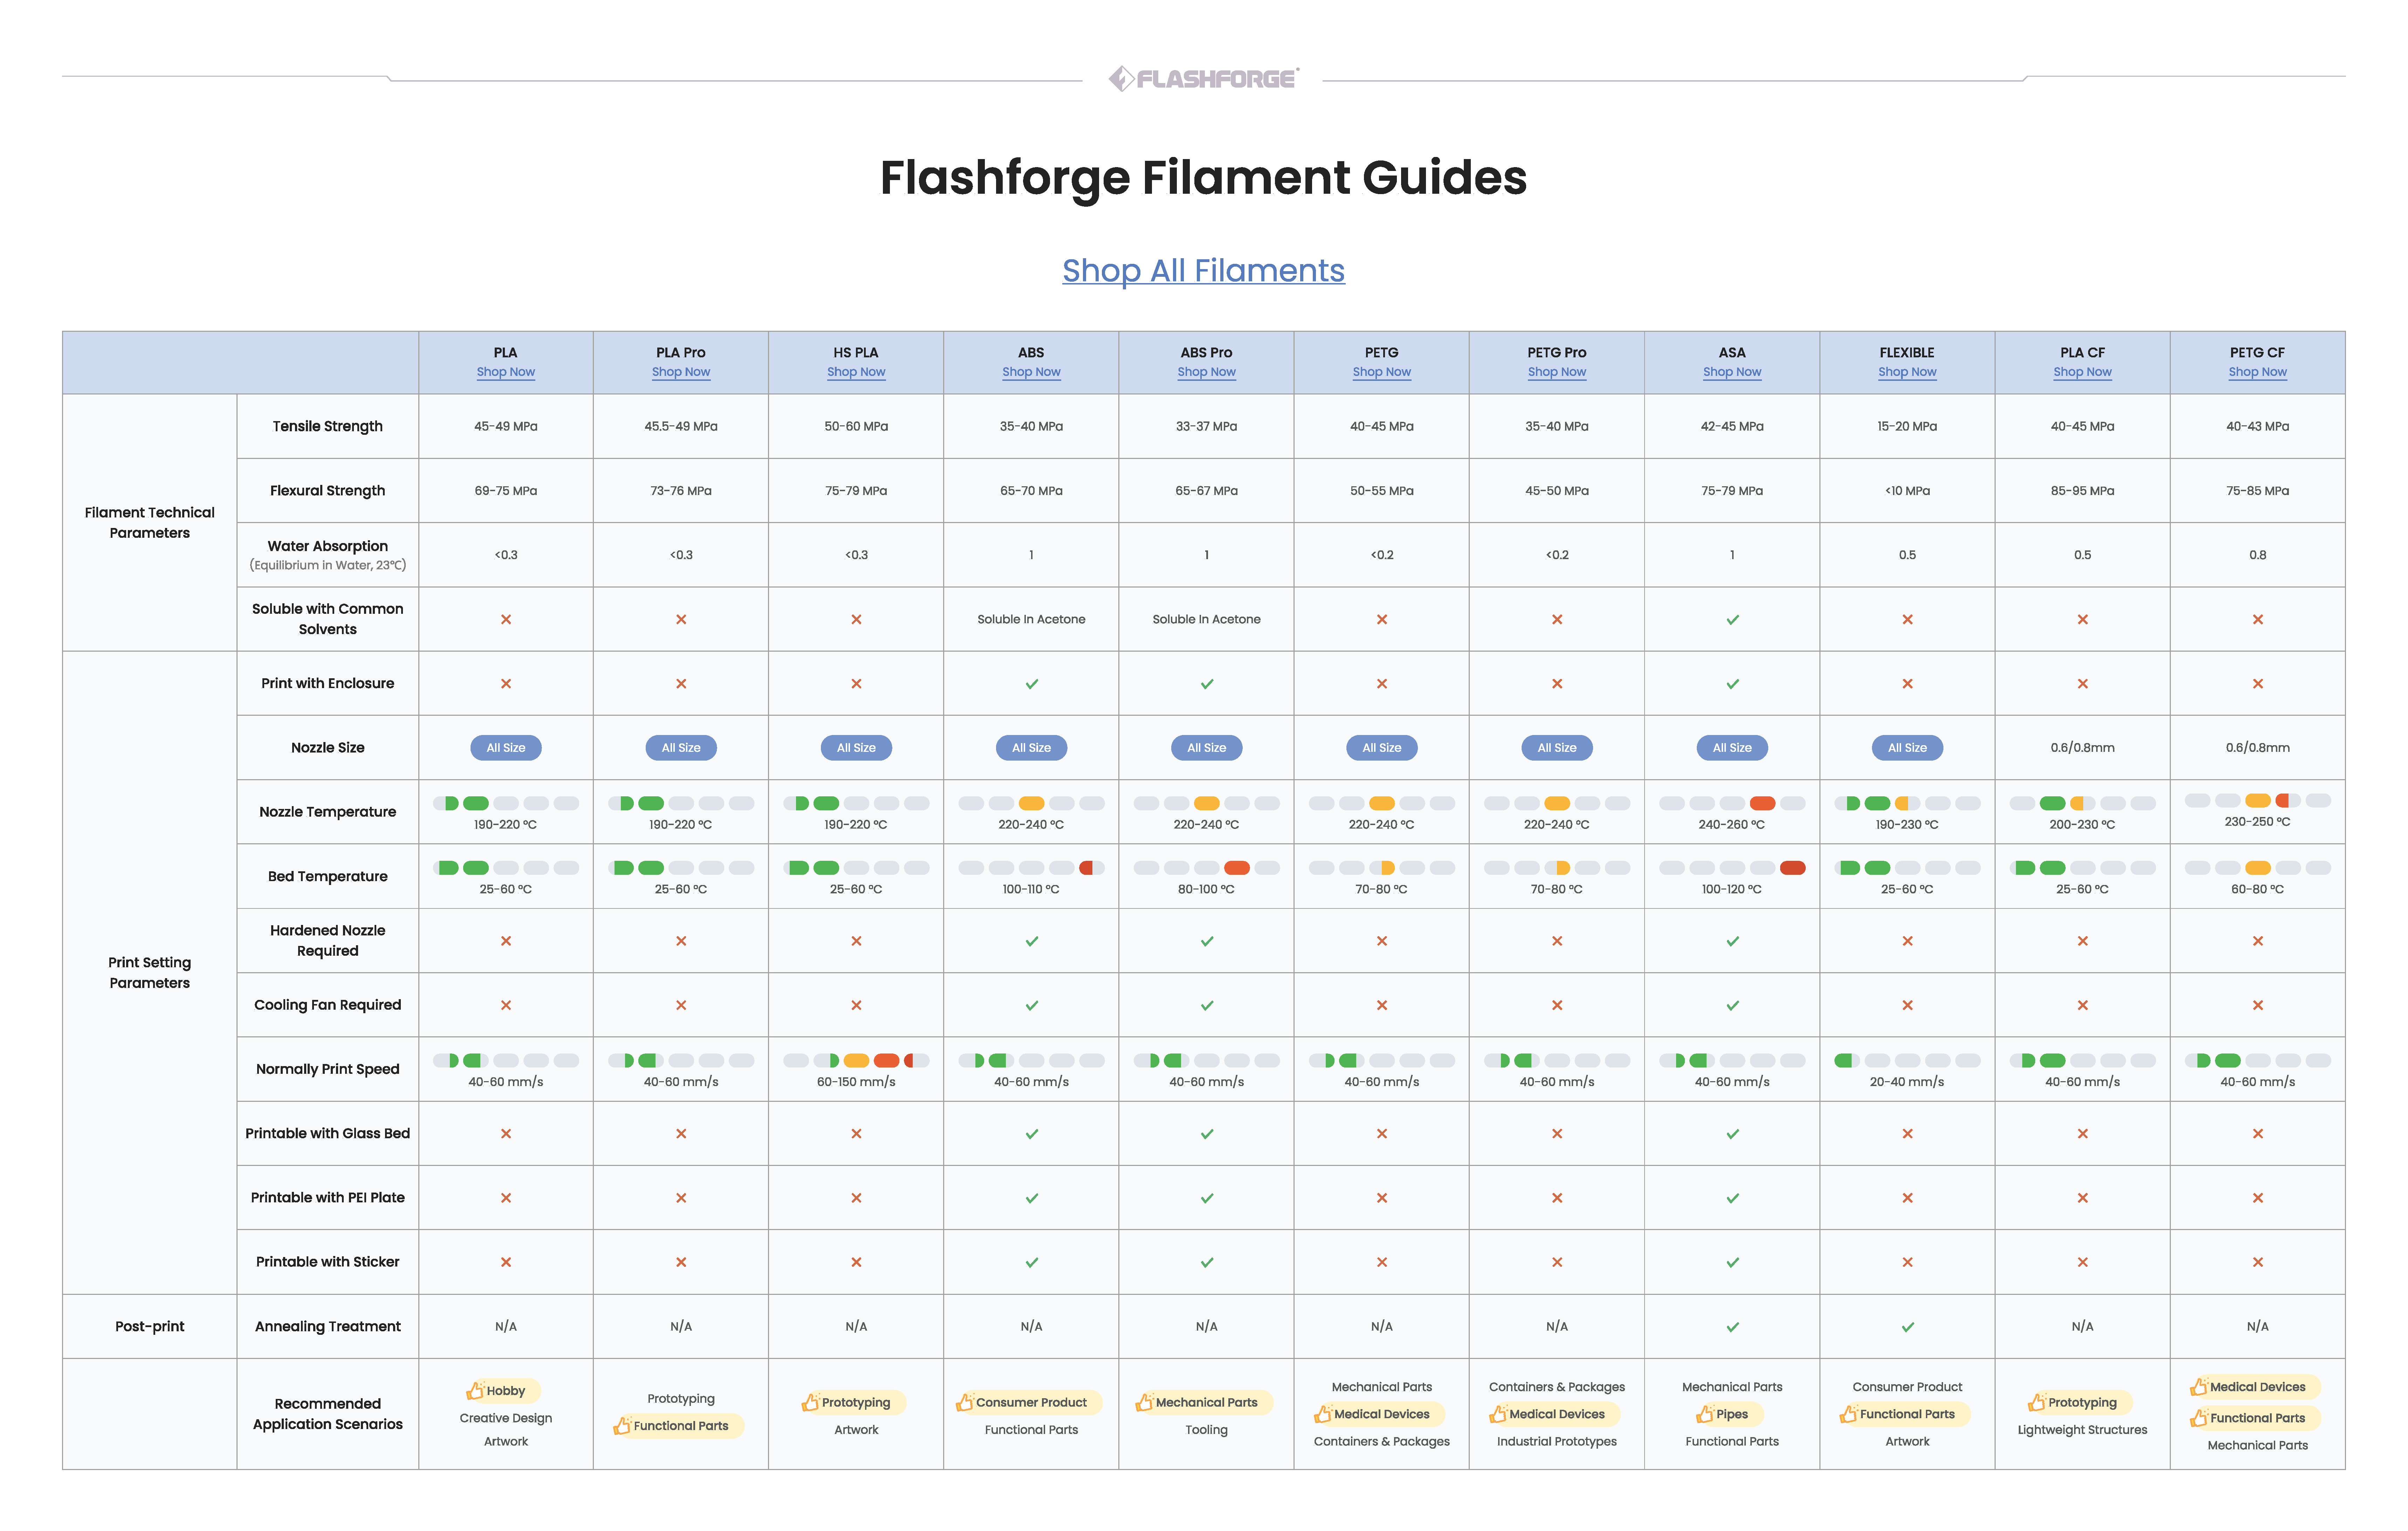 filament_guide_picture.png